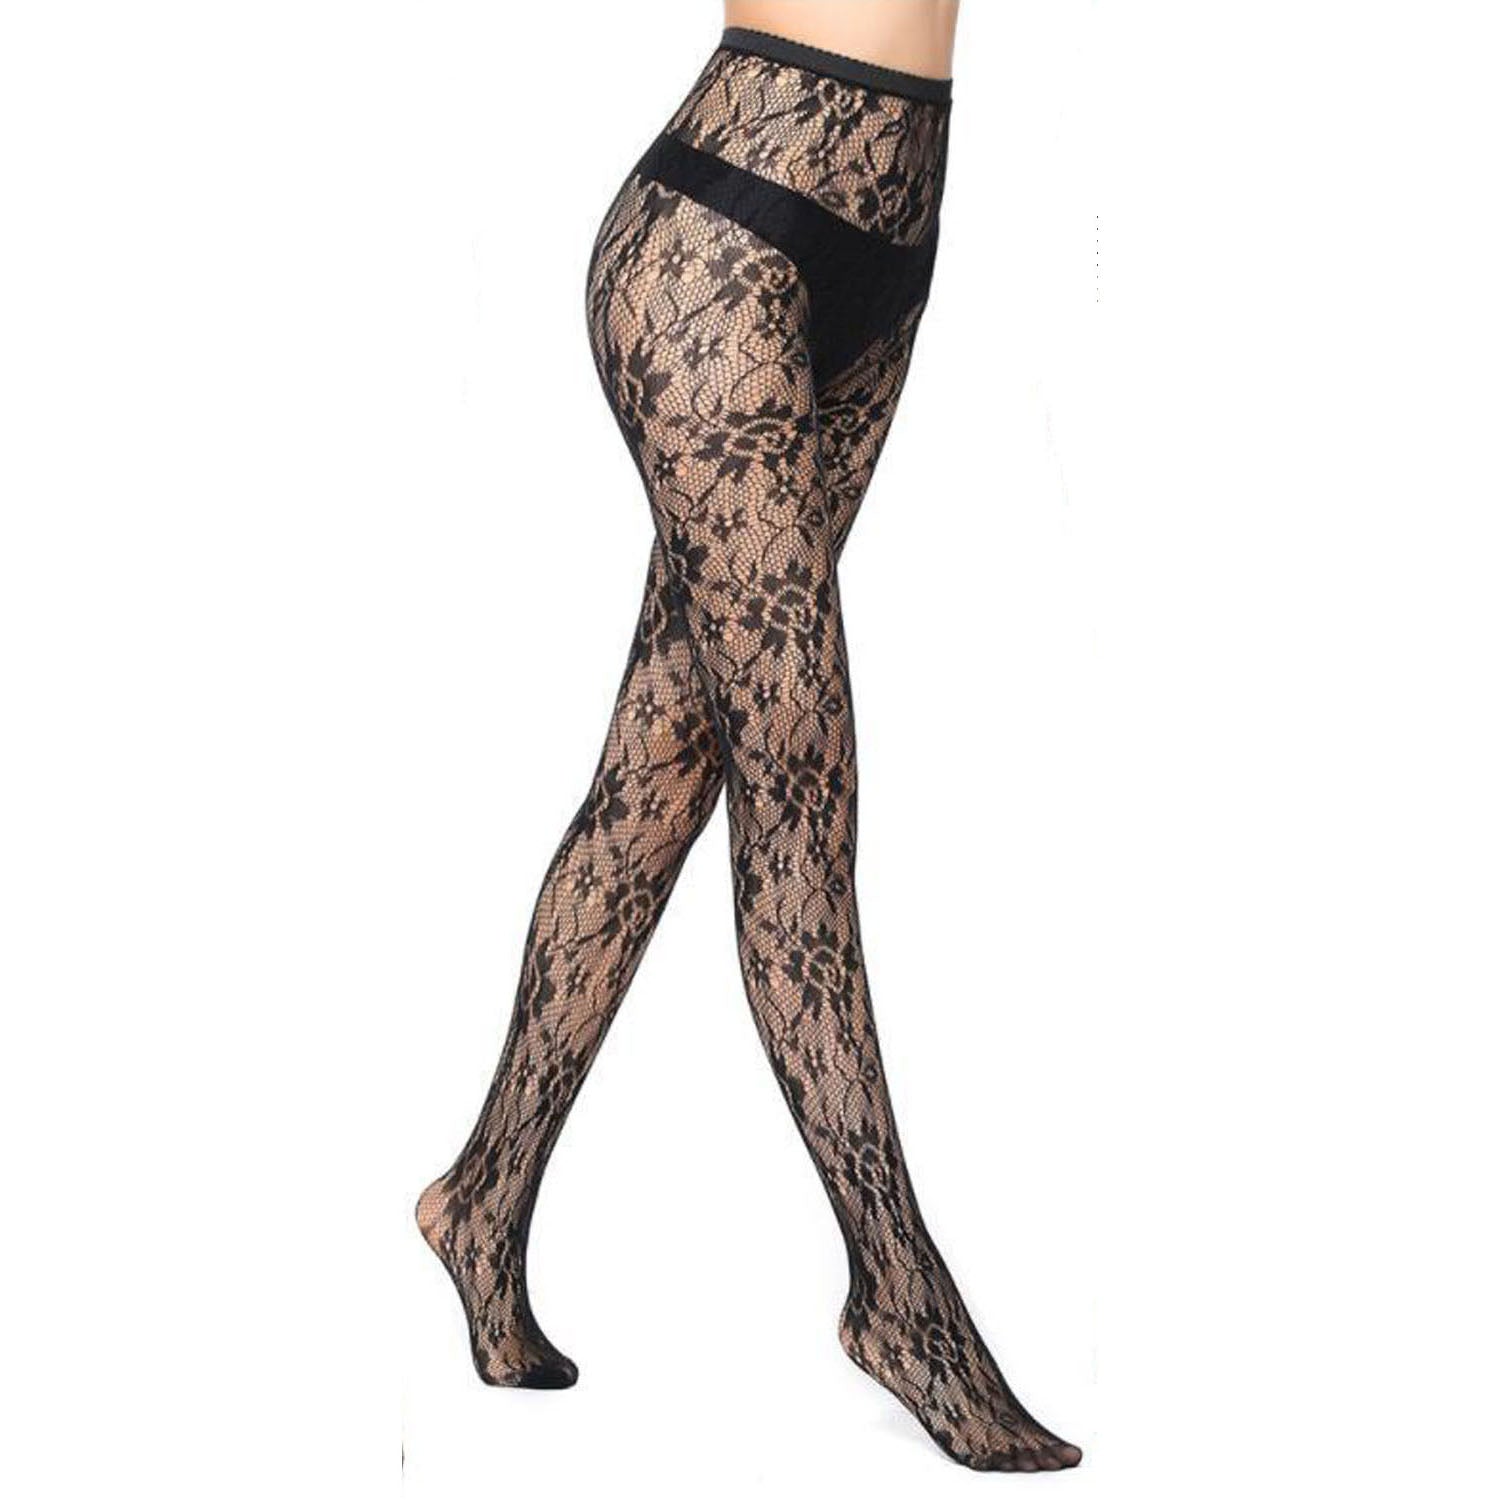 Simply Joshimo Floral Patterned Black Fishnet Tights